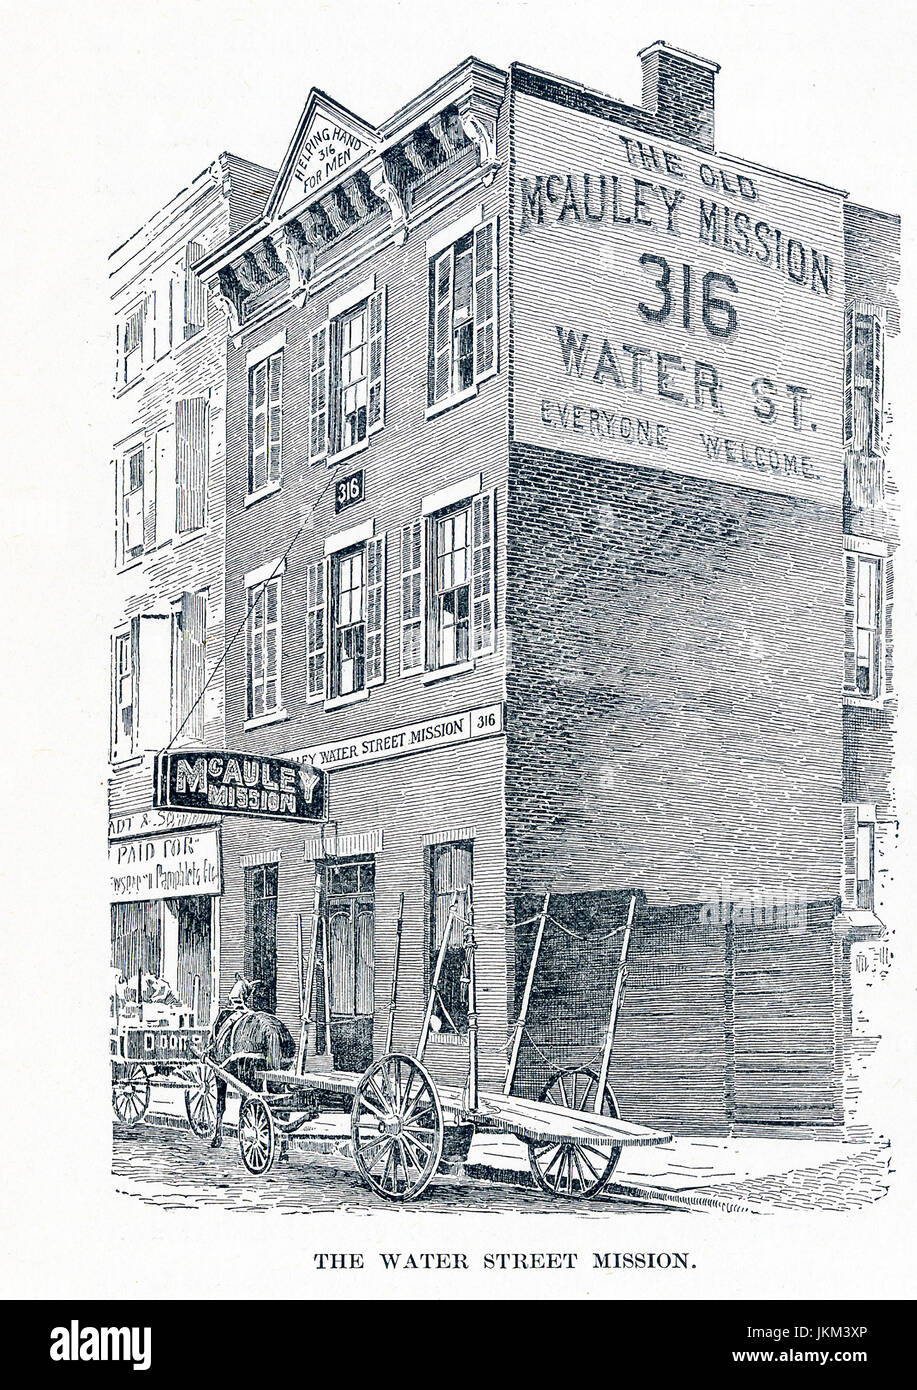 This late 19the-century illustration showst the Water Street Mission at 316 Water Street in New York City. In 1872 businessman Frederick Hatch bought the property in Lower Manhattan that became the Water Street Mission. He had met Jerry McAuley and put him in charge of this new venture - America's first Rescue Mission. Stock Photo